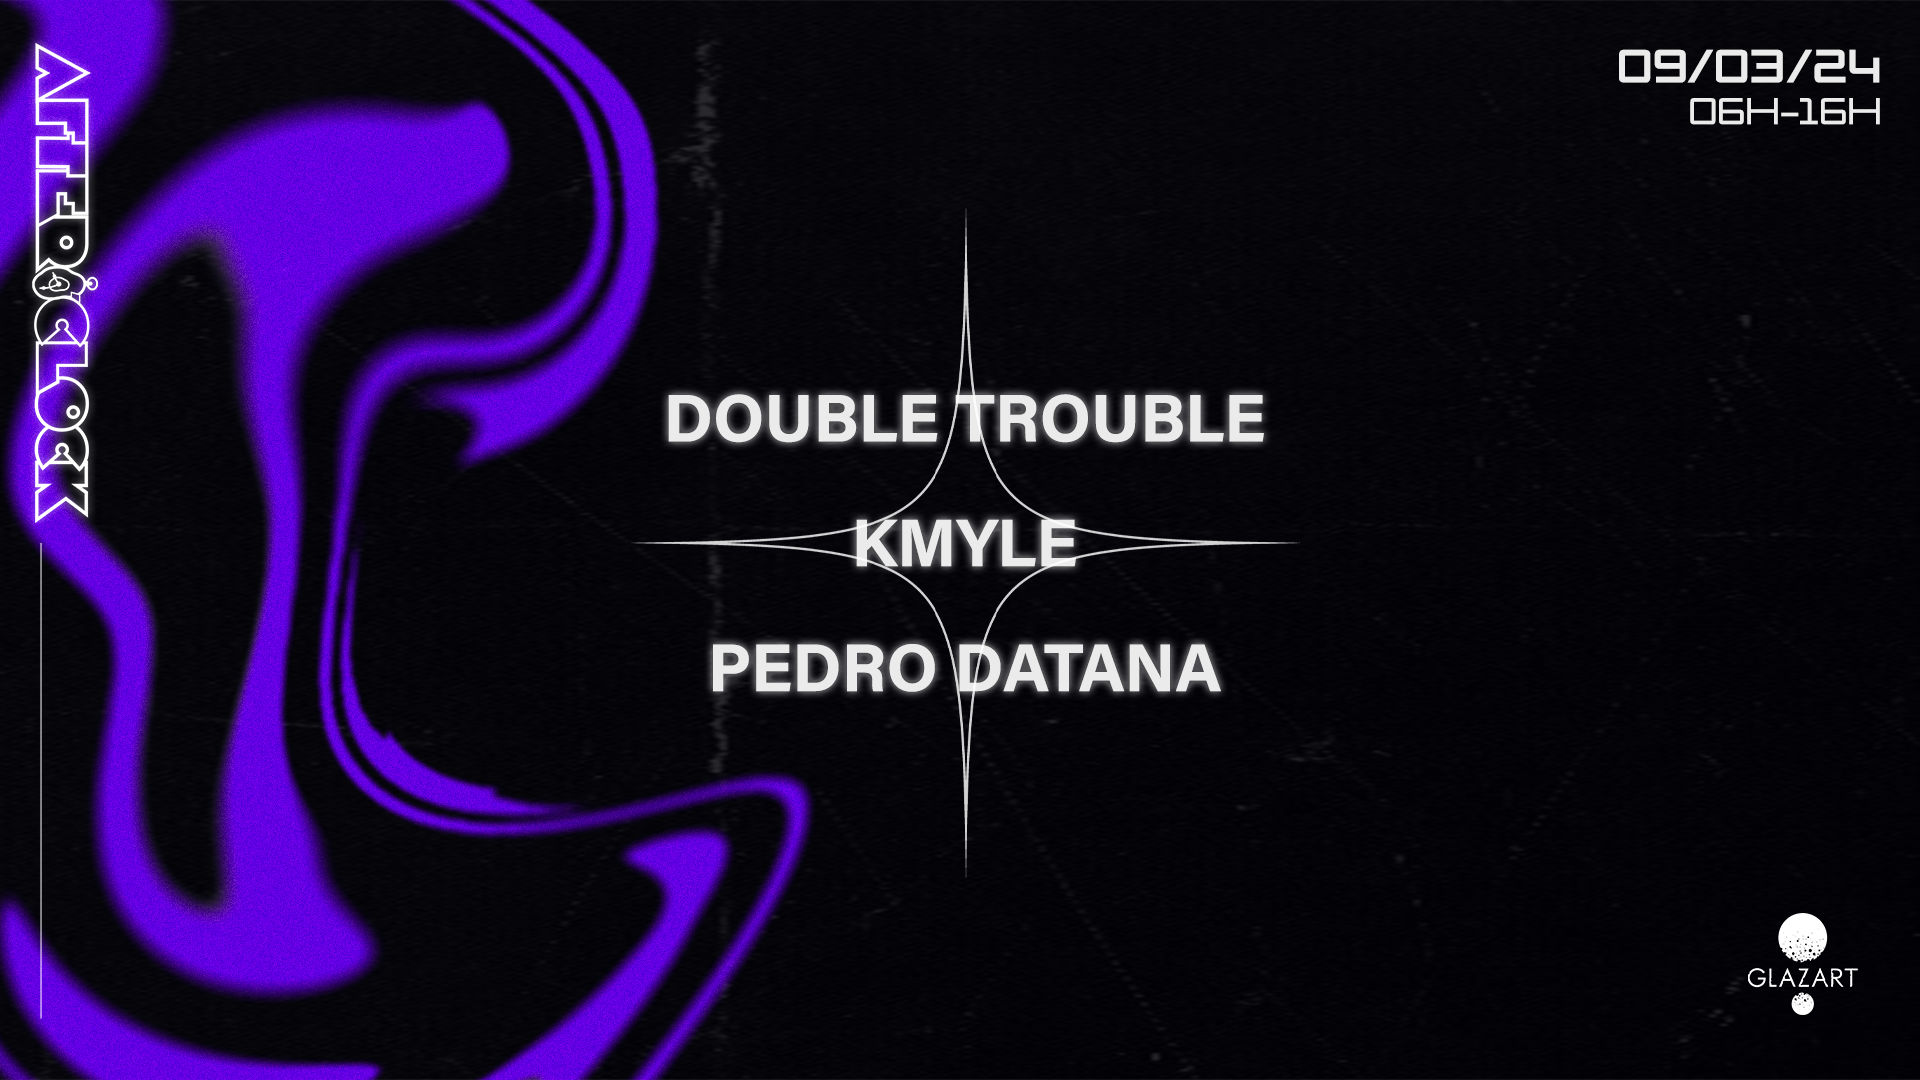 After O'Clock: Double Trouble, Pedro Datana & Kmyle - フライヤー表